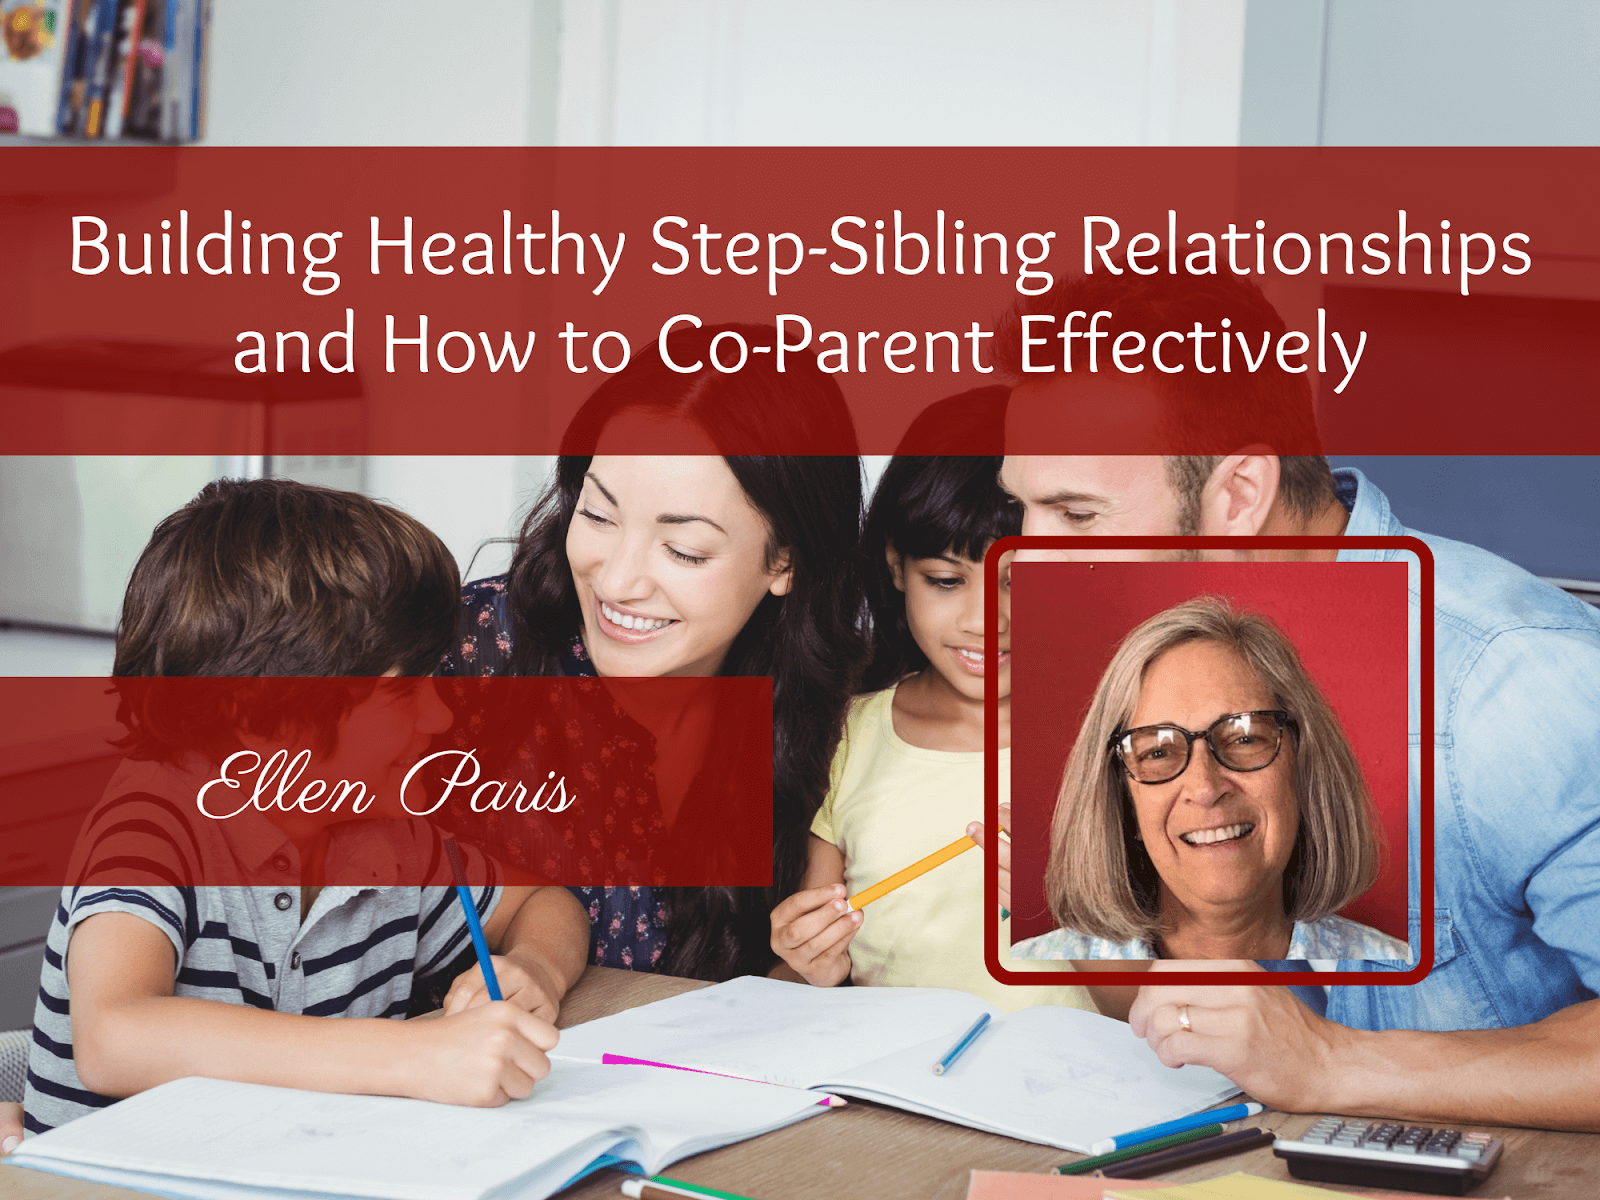 Building Healthy Step-Sibling Relationships and How to Co-Parent Effectively